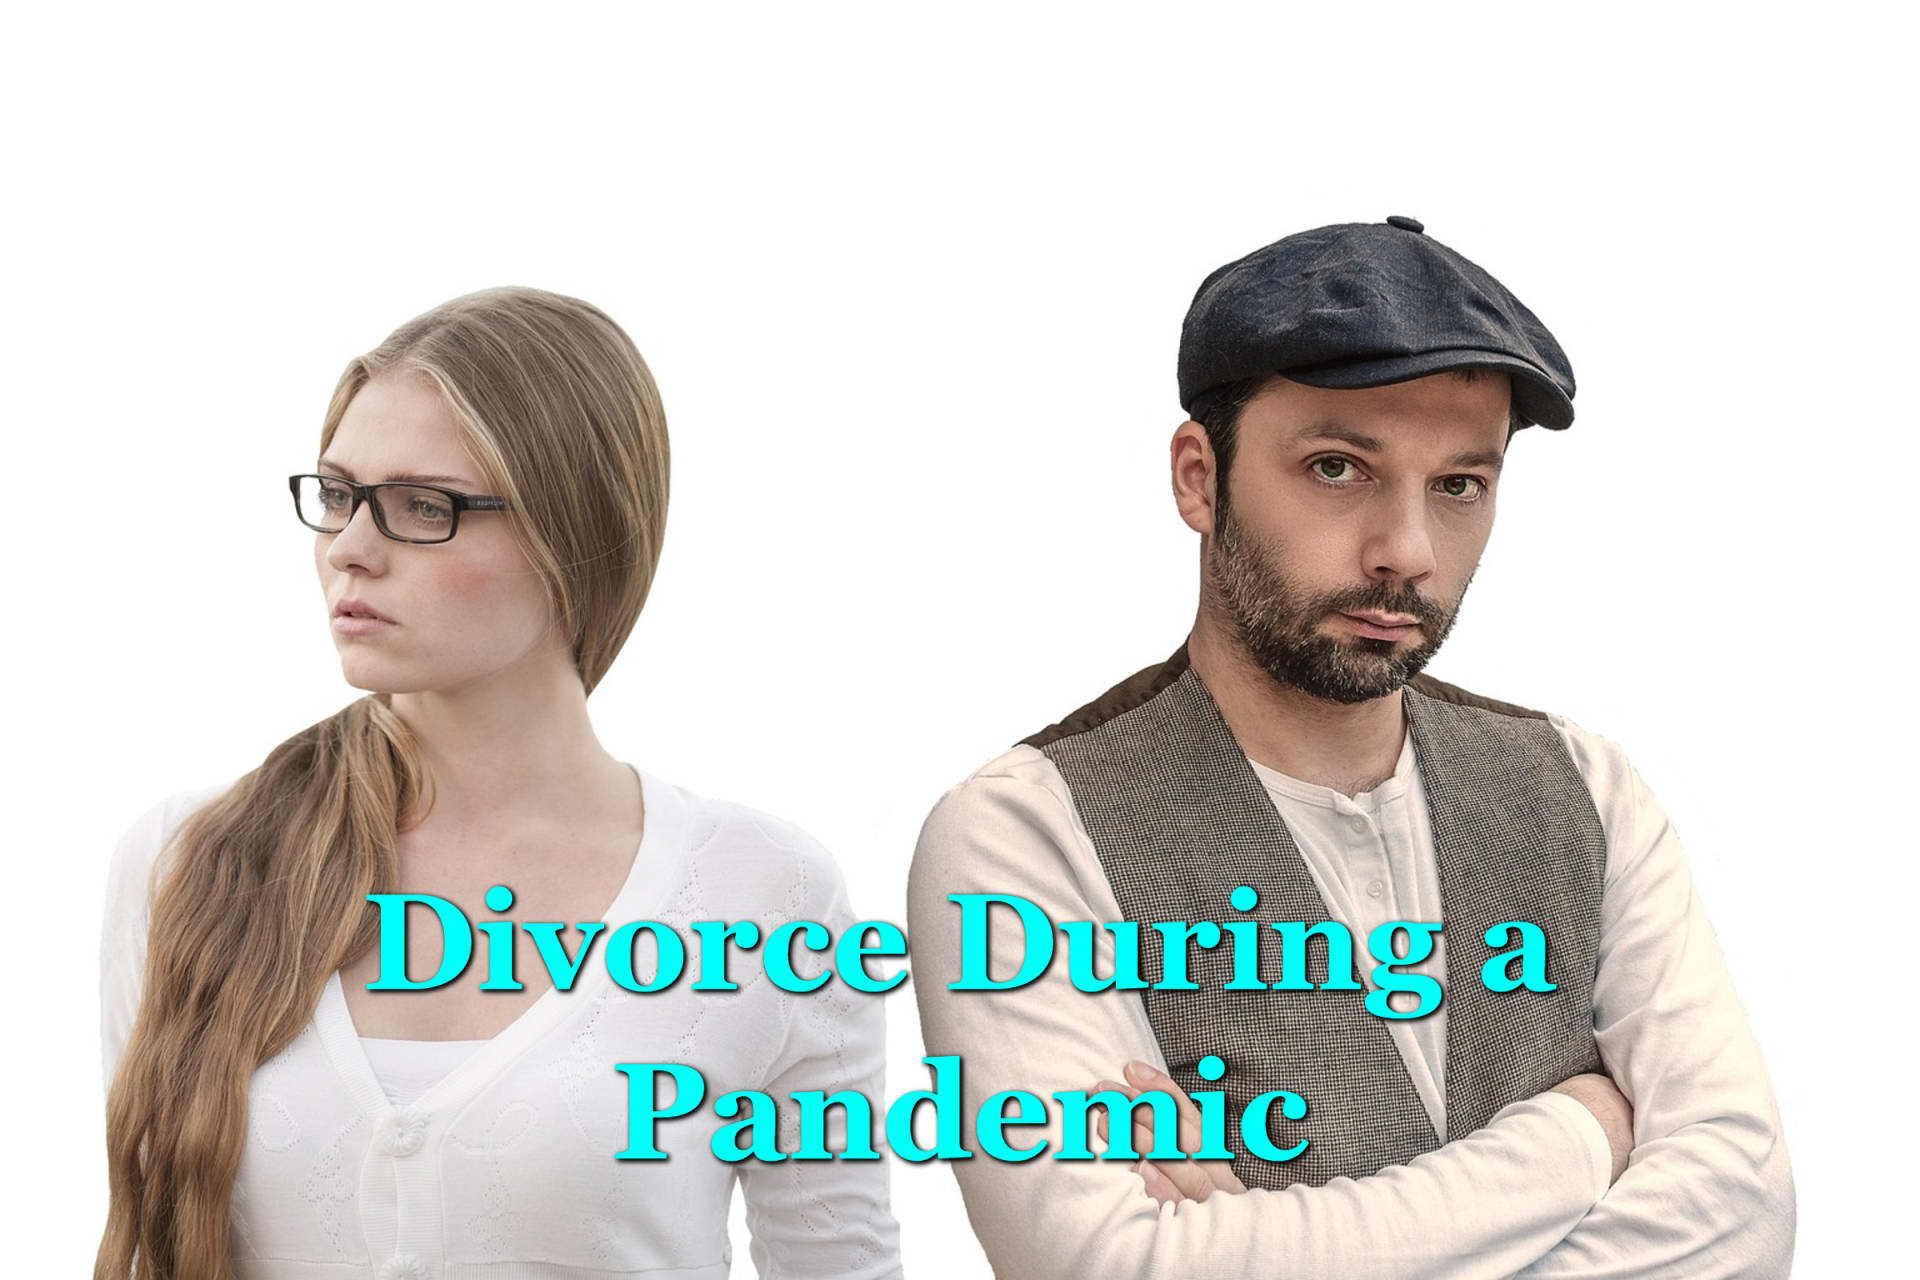 7 Ways to Prepare (At-Home) for Divorce During a Pandemic